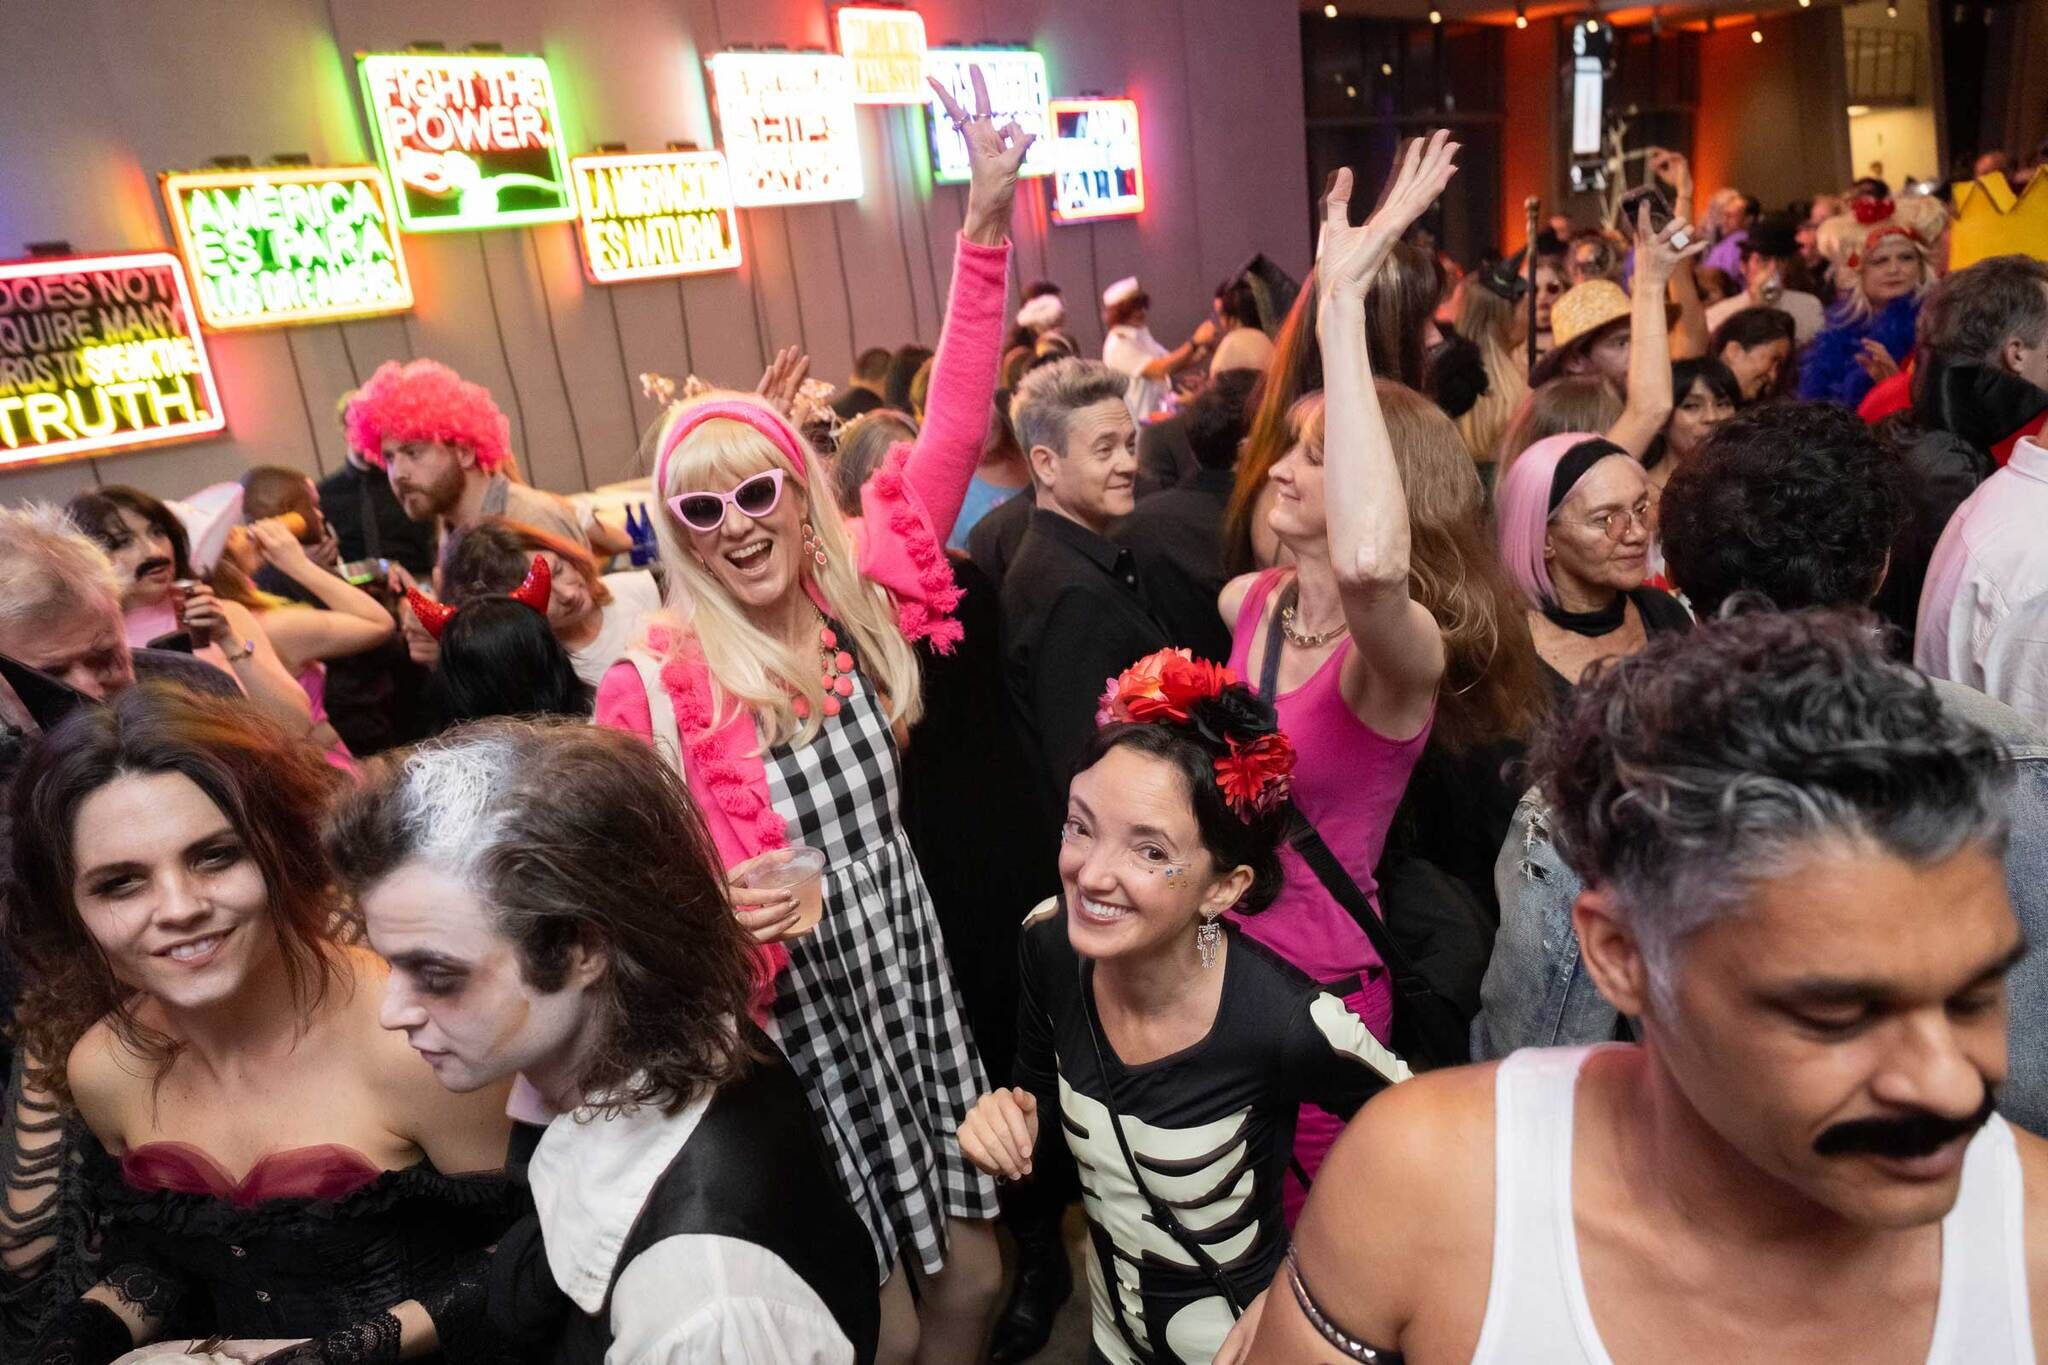 Crowd of people dancing in front of a bar int he Whitney Museum Lobby. Guests in costume with pink hair and retro glasses featured at center.